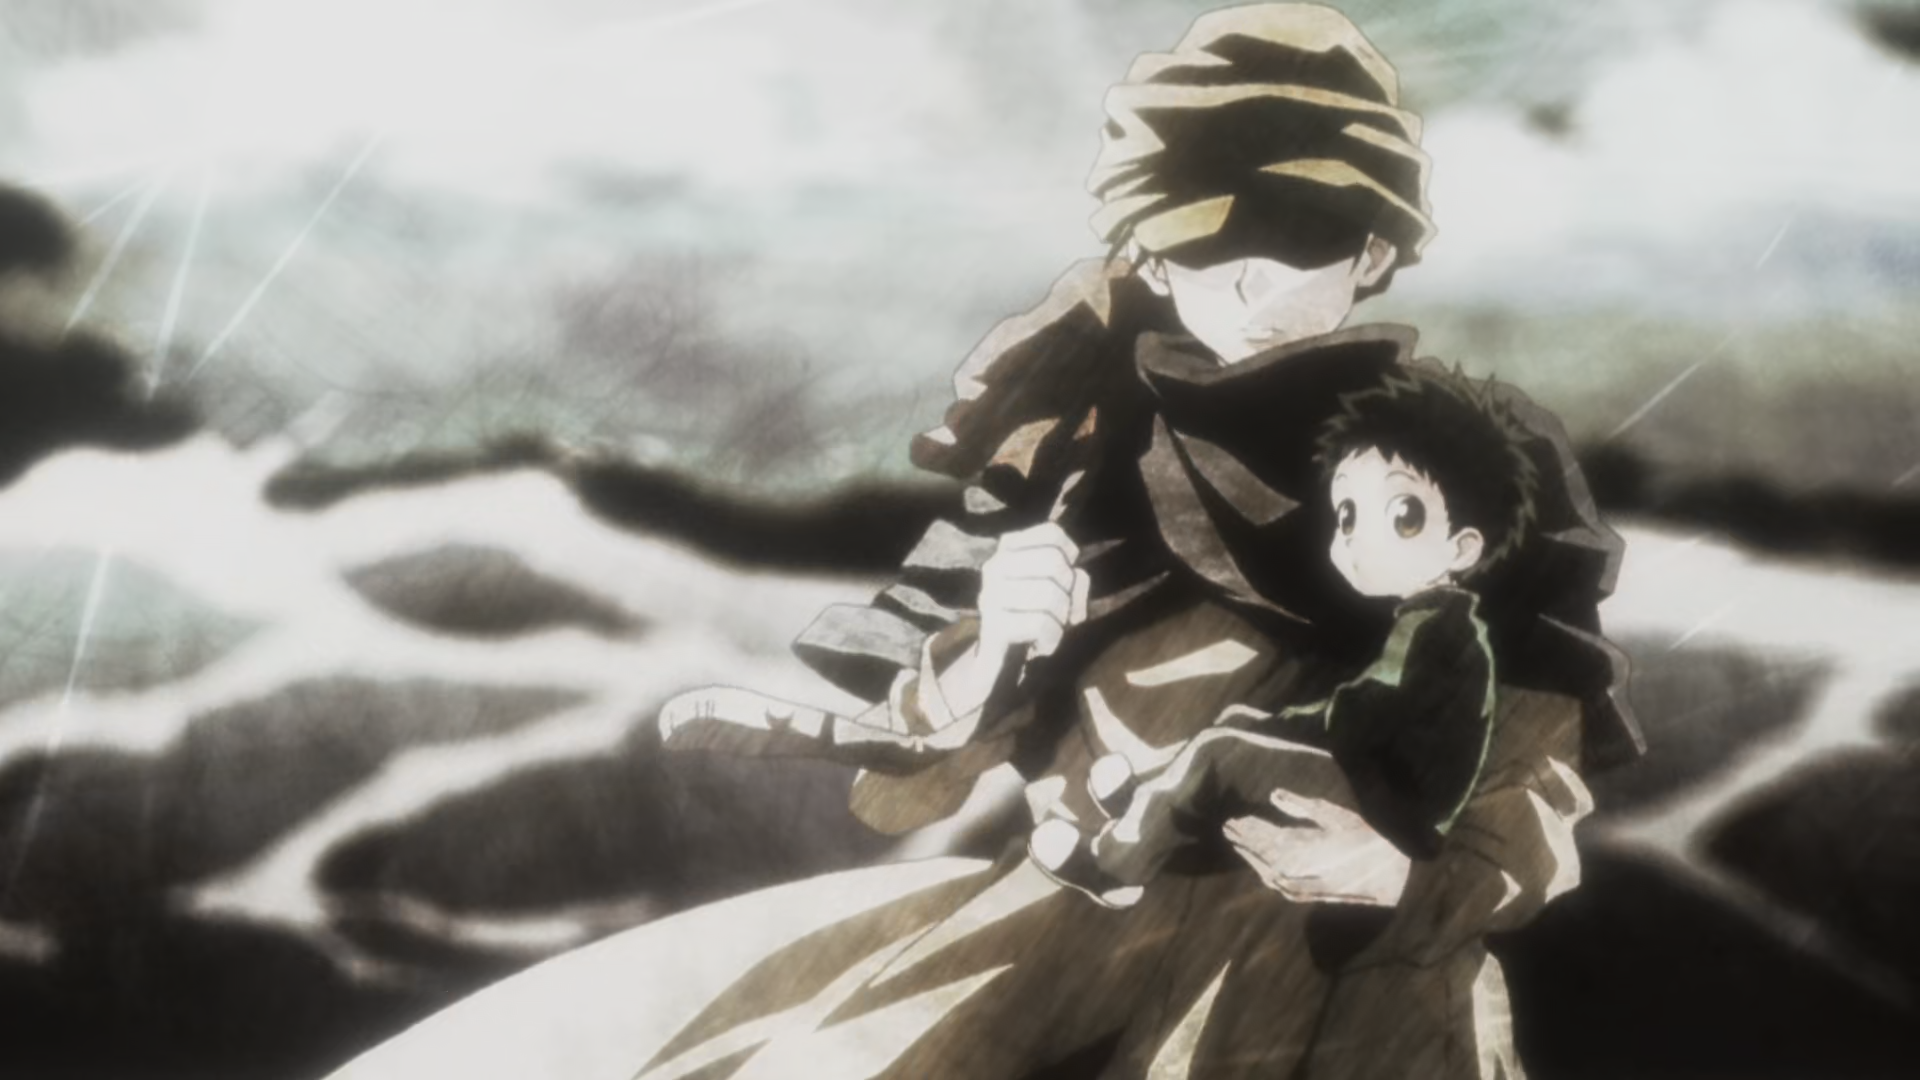 Reminder that Ging originally wanted to take Gon with him on his adventures  but Aunt Mito took him to court for legal custody of Gon. And despite not  wanting to see him